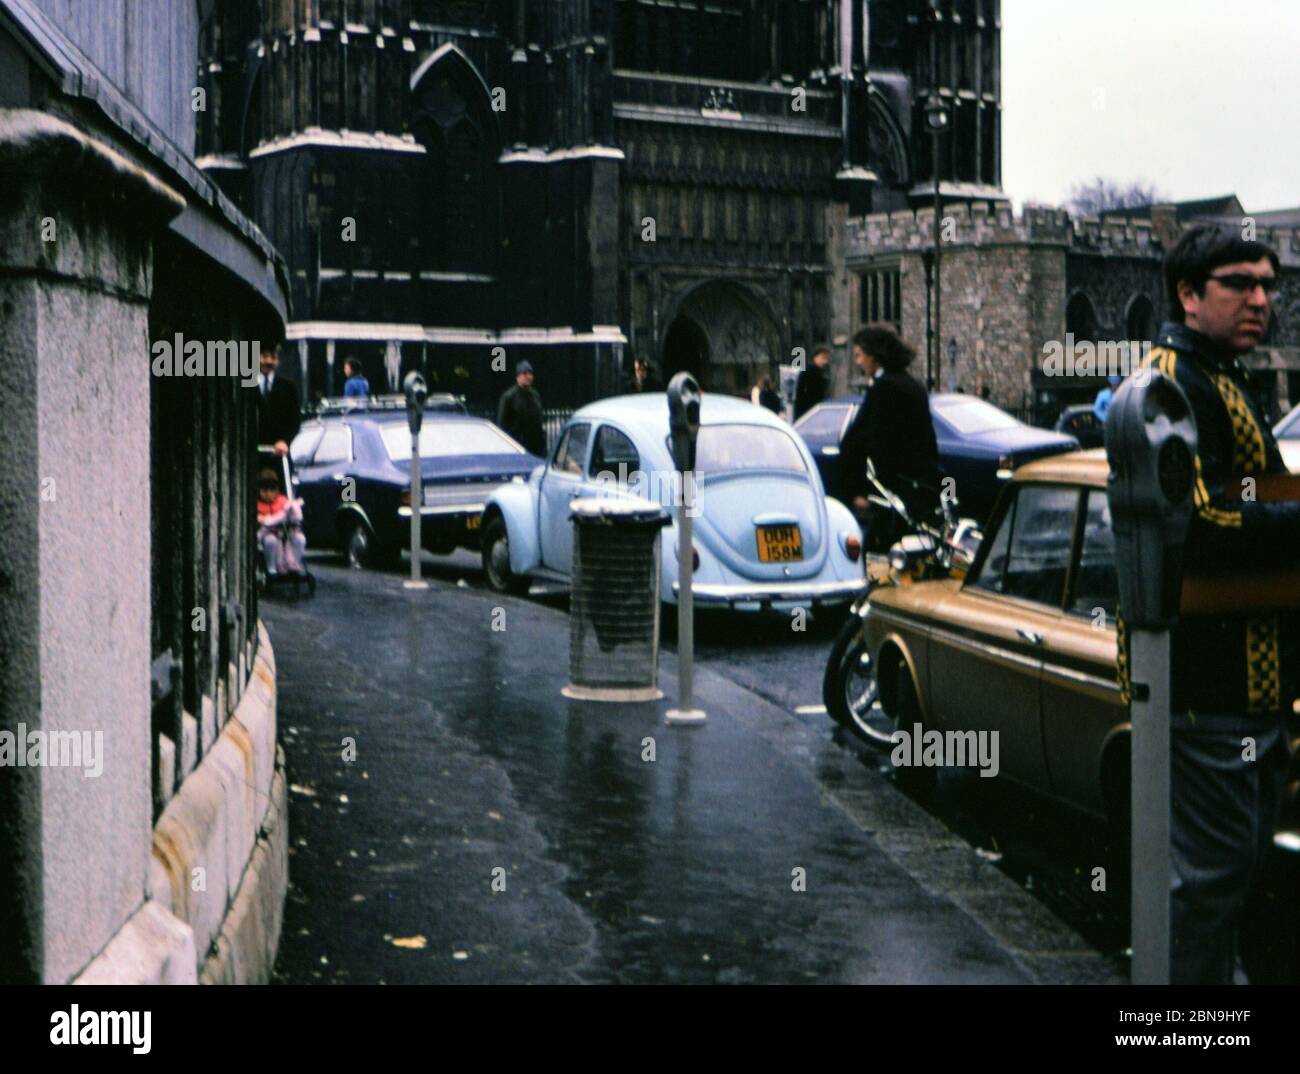 1970s London - (R) - Cars parked, possibly on a street in London ca. 1972 Stock Photo